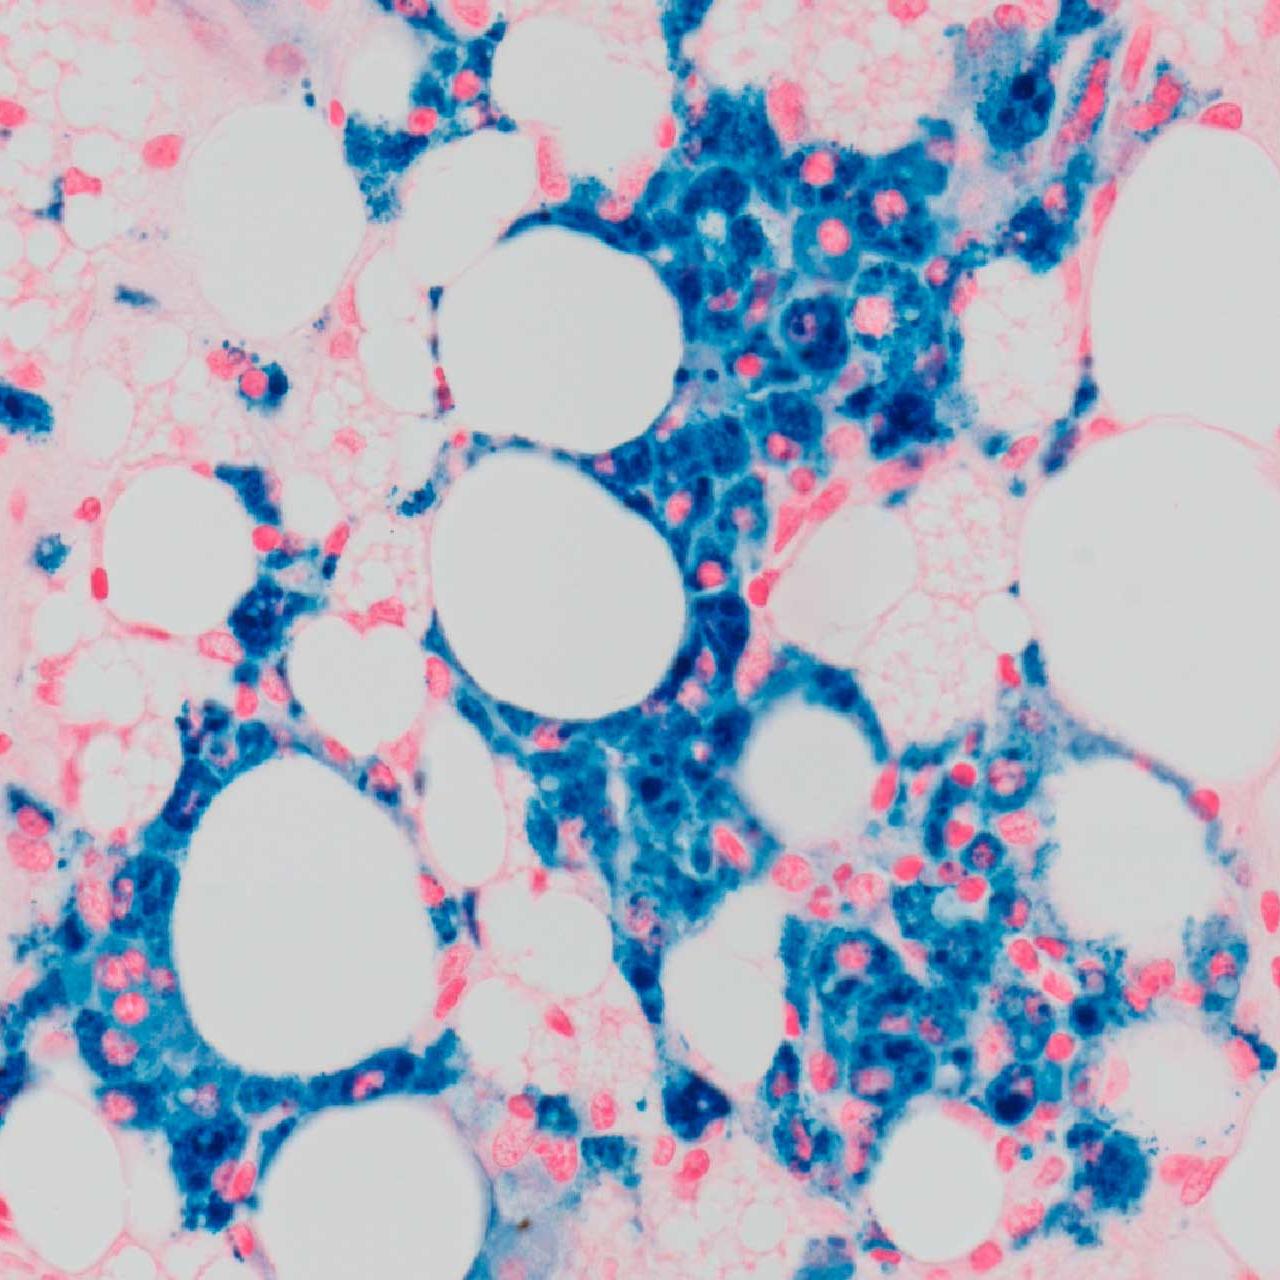 Brown adipose tissue of mice